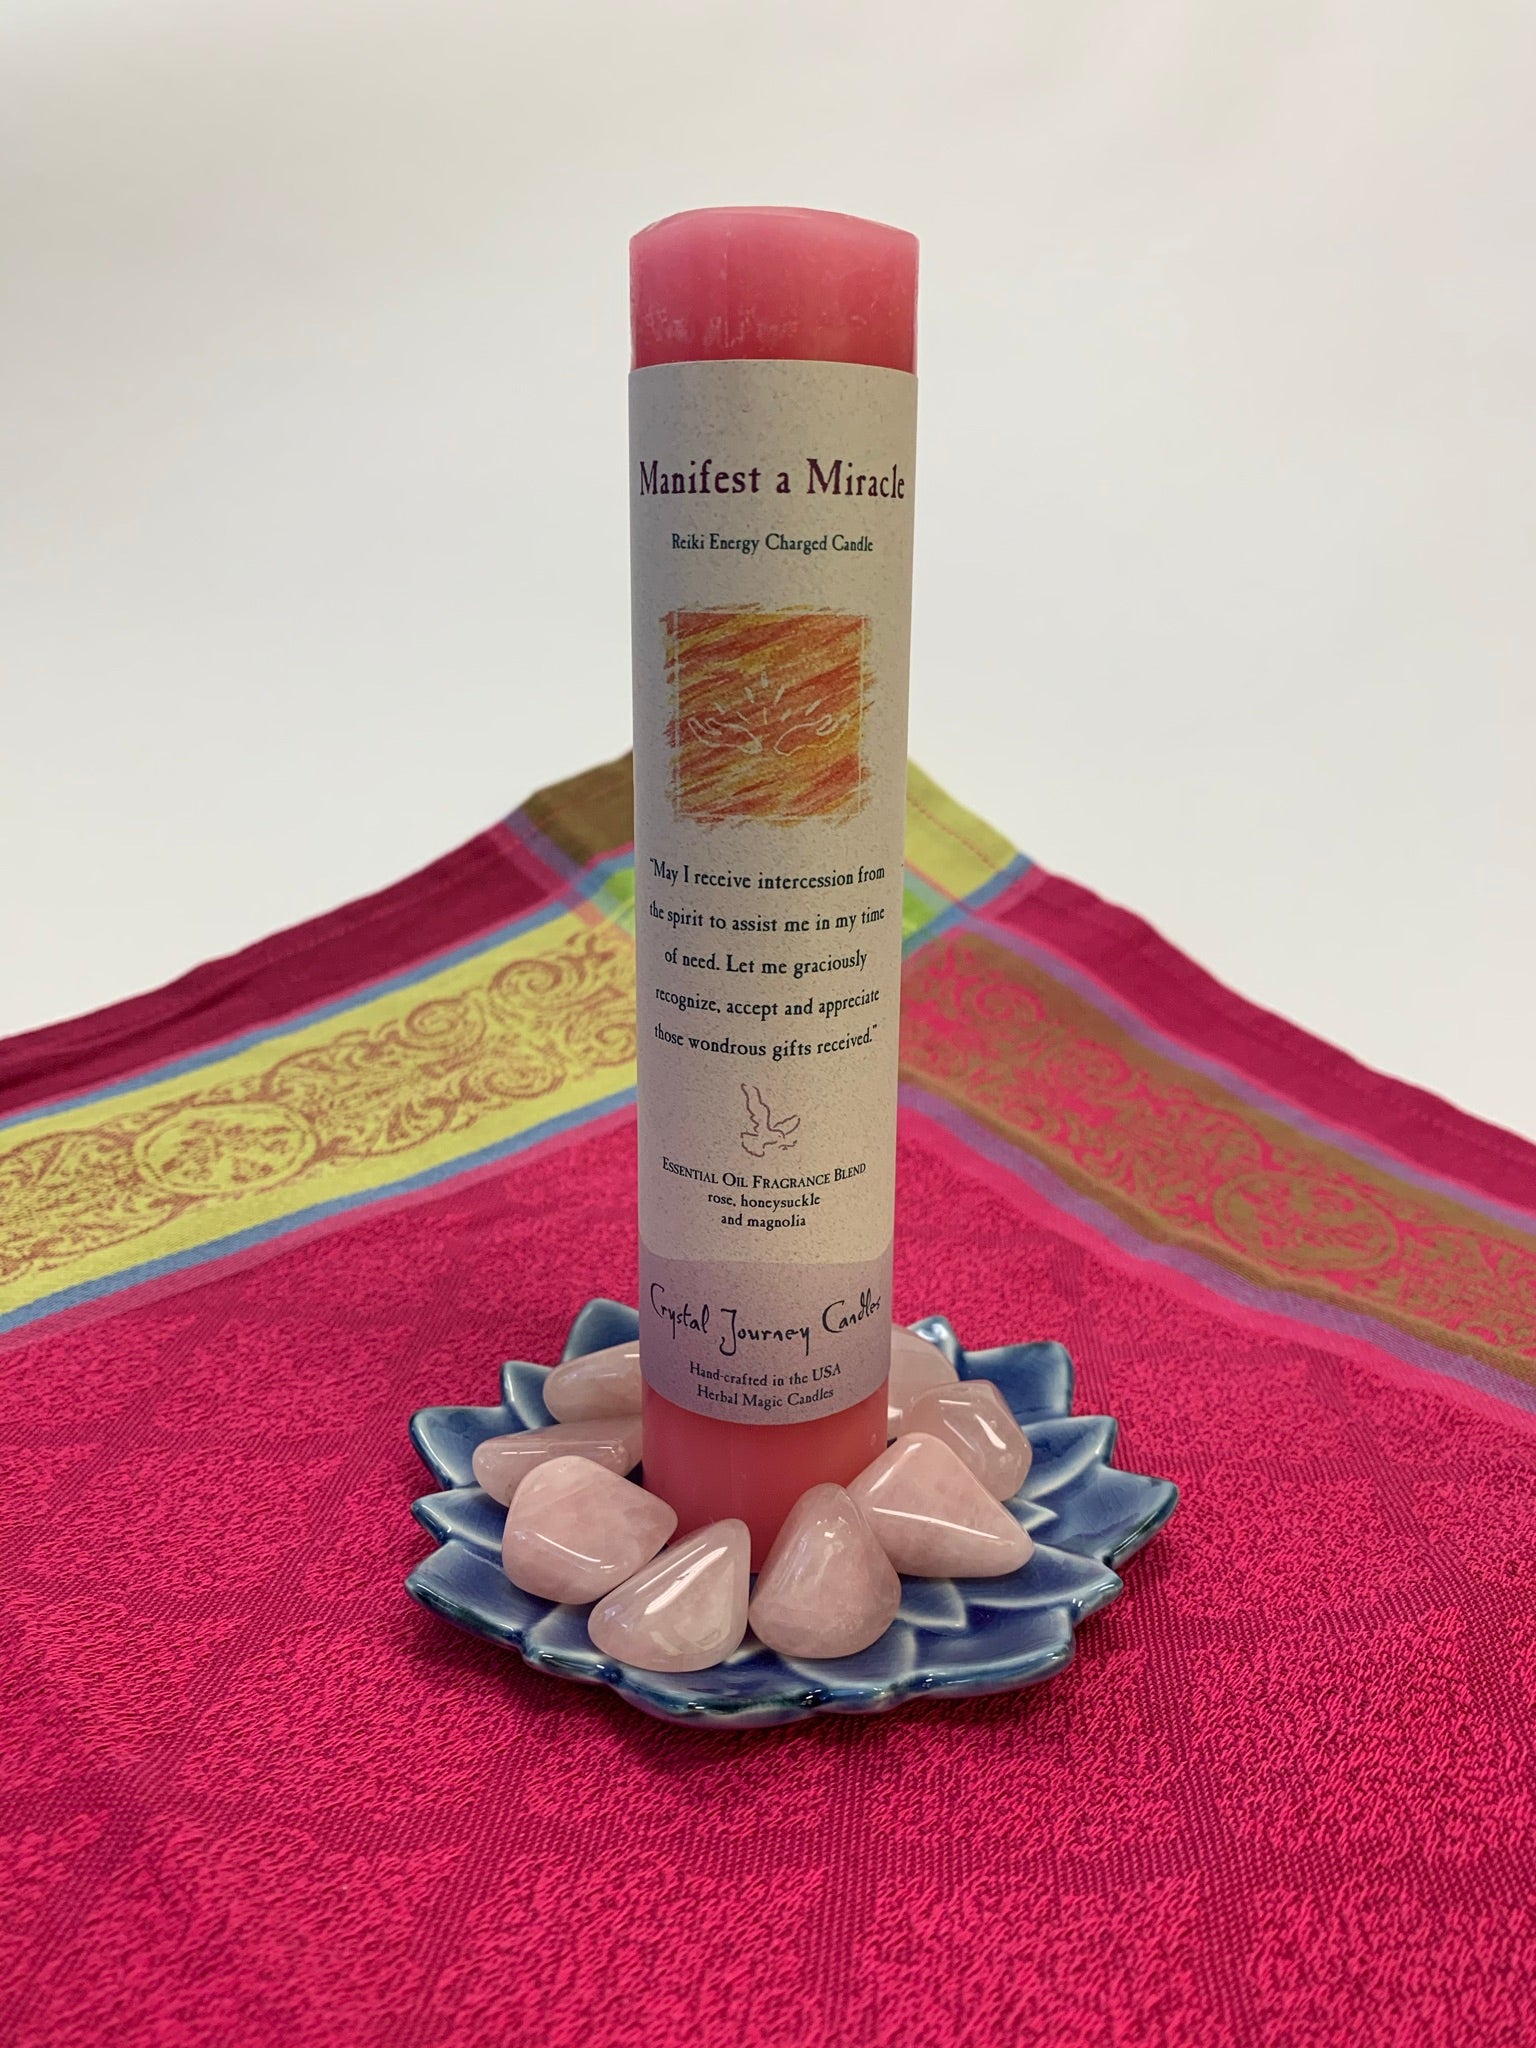 Reiki-charged pillar candle for "manifesting a miracle." It is handcrafted and scented using essential oils. An affirmation/prayer is printed on the label, as well as a listing of the essential oils used (rose, honeysuckle & magnolia). It is approximately 7"x1½." Perfect for meditation, prayer, visualization or quiet time. This pink candle and its label are both visually appealing.